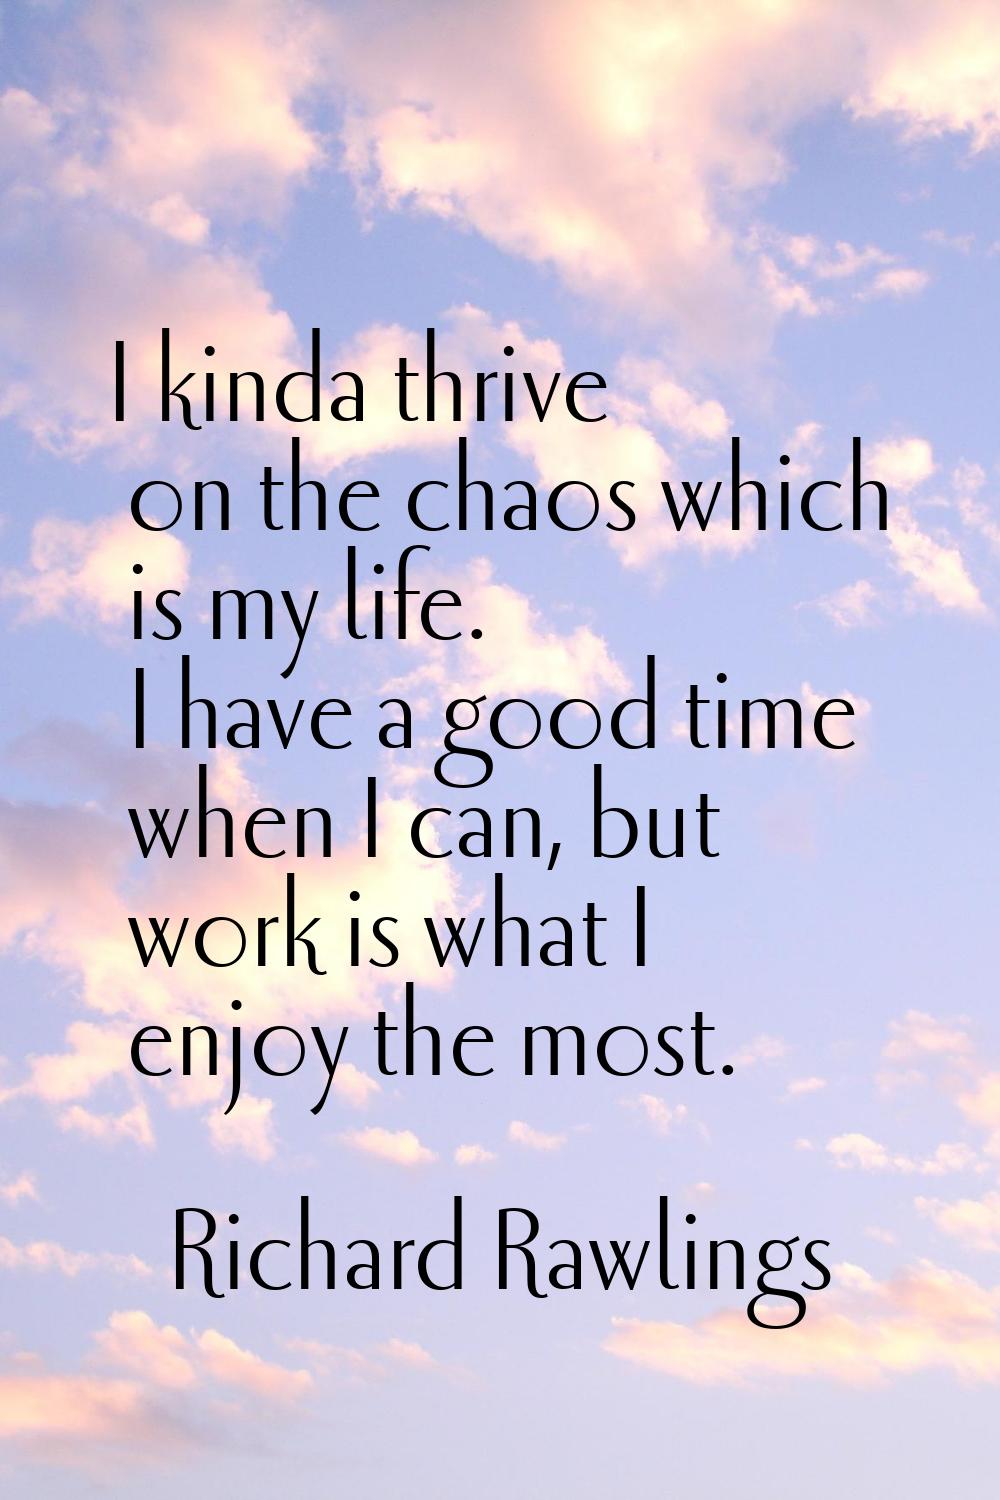 I kinda thrive on the chaos which is my life. I have a good time when I can, but work is what I enj